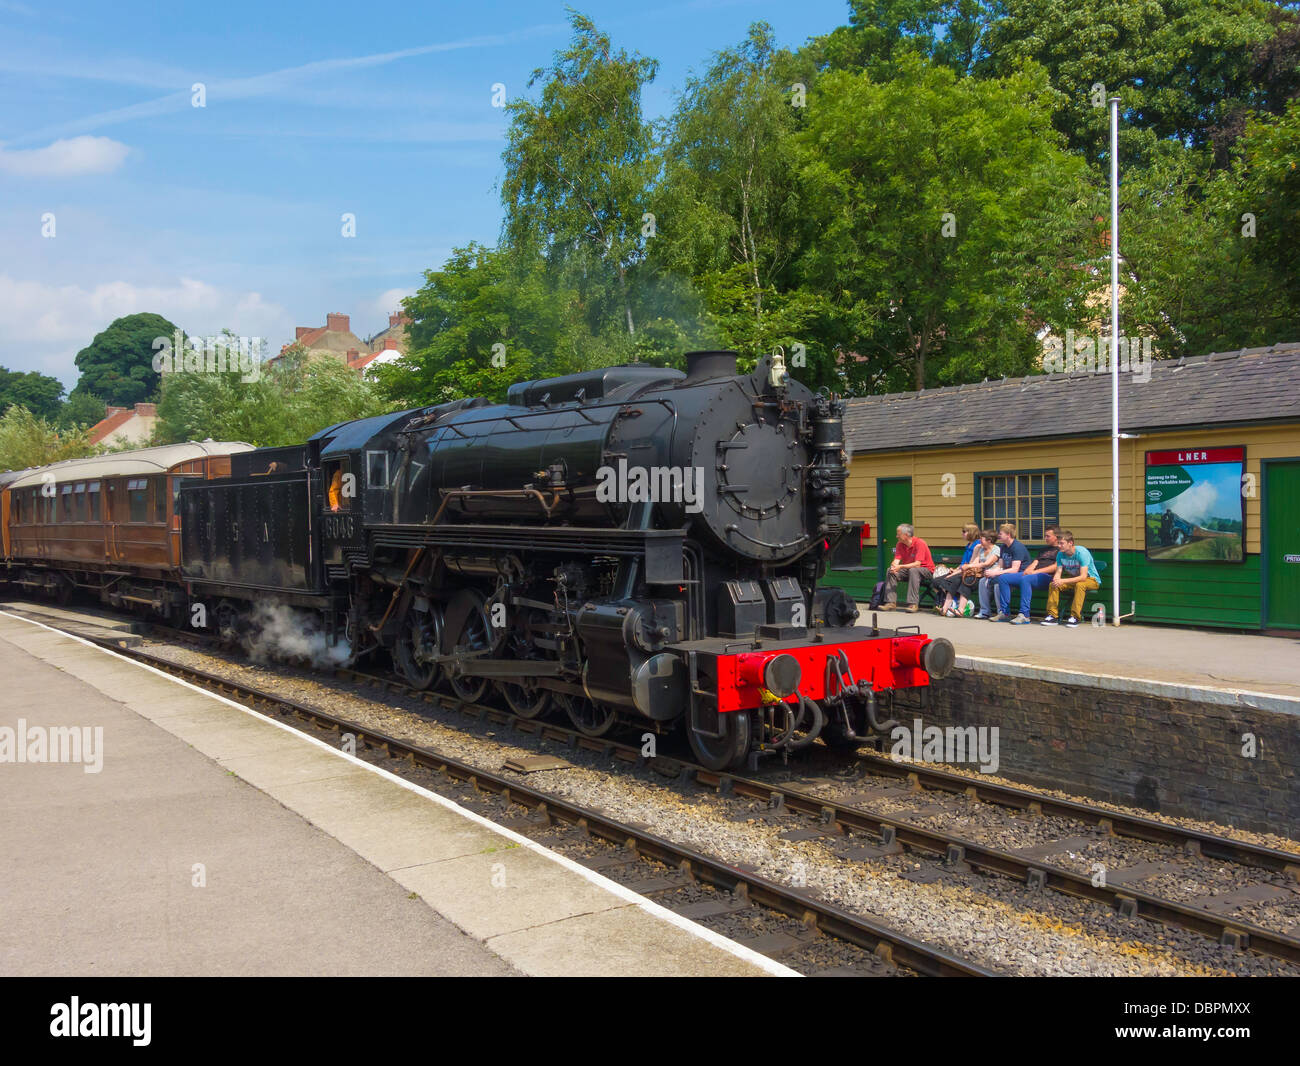 American steam locomotive built by Baldwin in Philadelphia in 1945 arriving at Pickering station NYMR in August 2013 Stock Photo